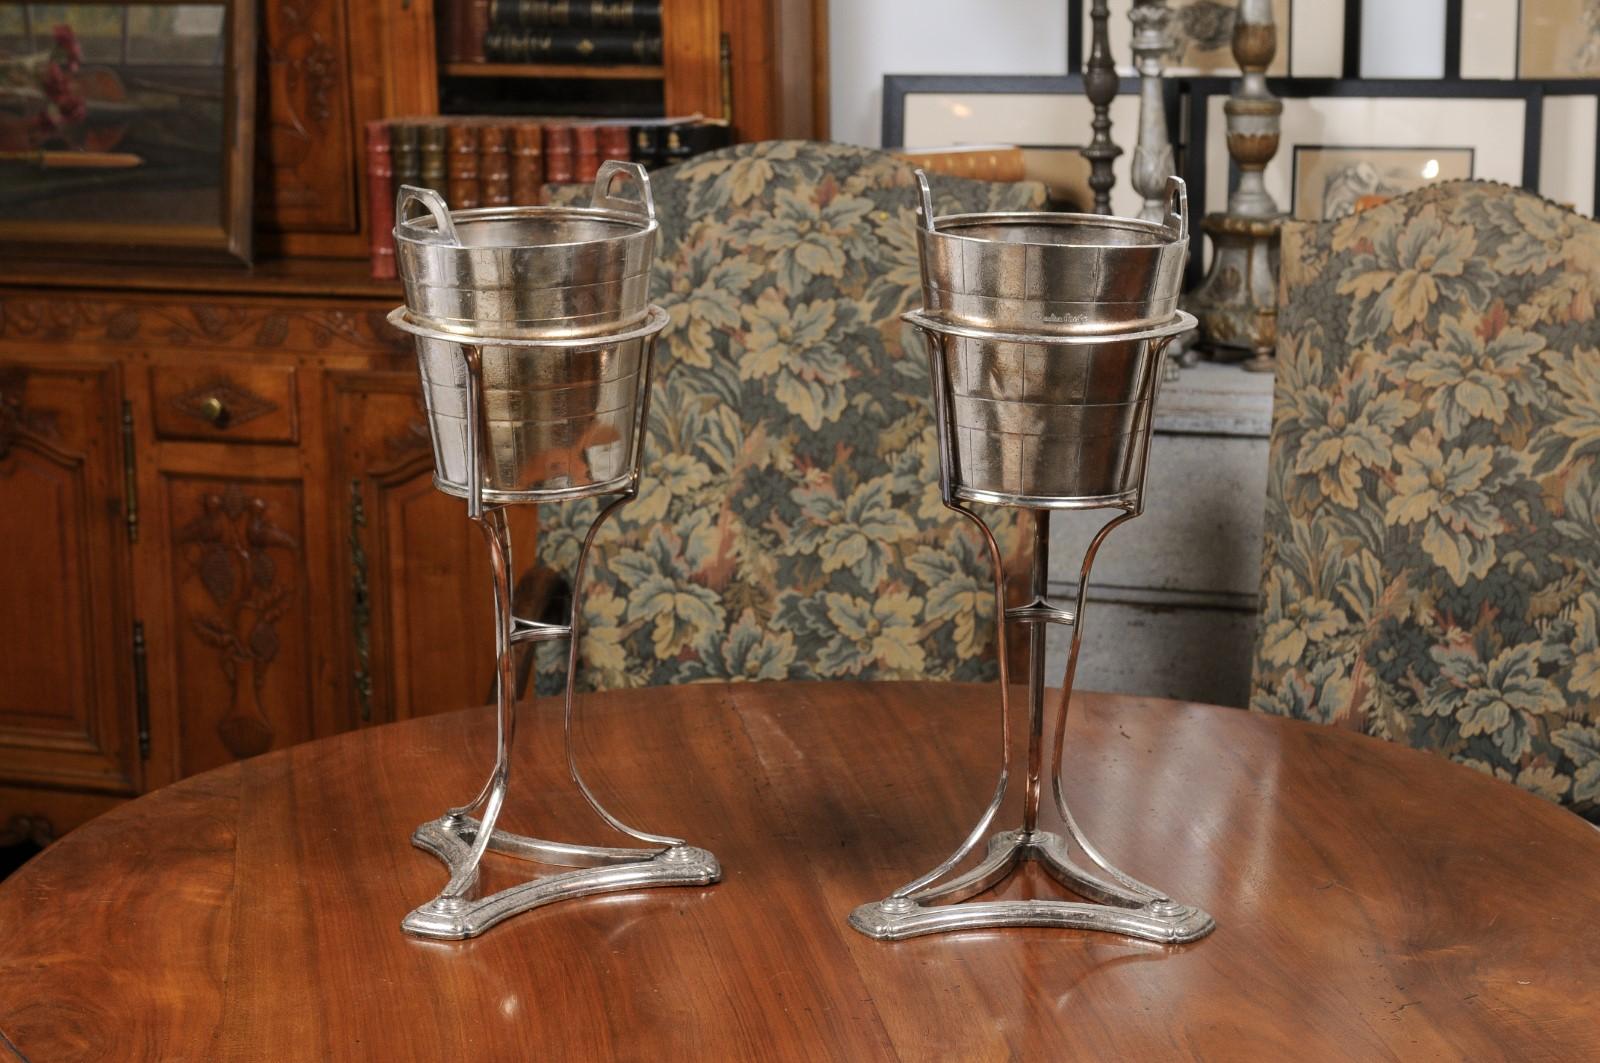 A pair of English vintage silver plated champagne buckets from the 20th century, made for a Canadian Pacific Railway train. Created in England during the 20th century, each of this pair of champagne buckets is mounted on a tripod stand with